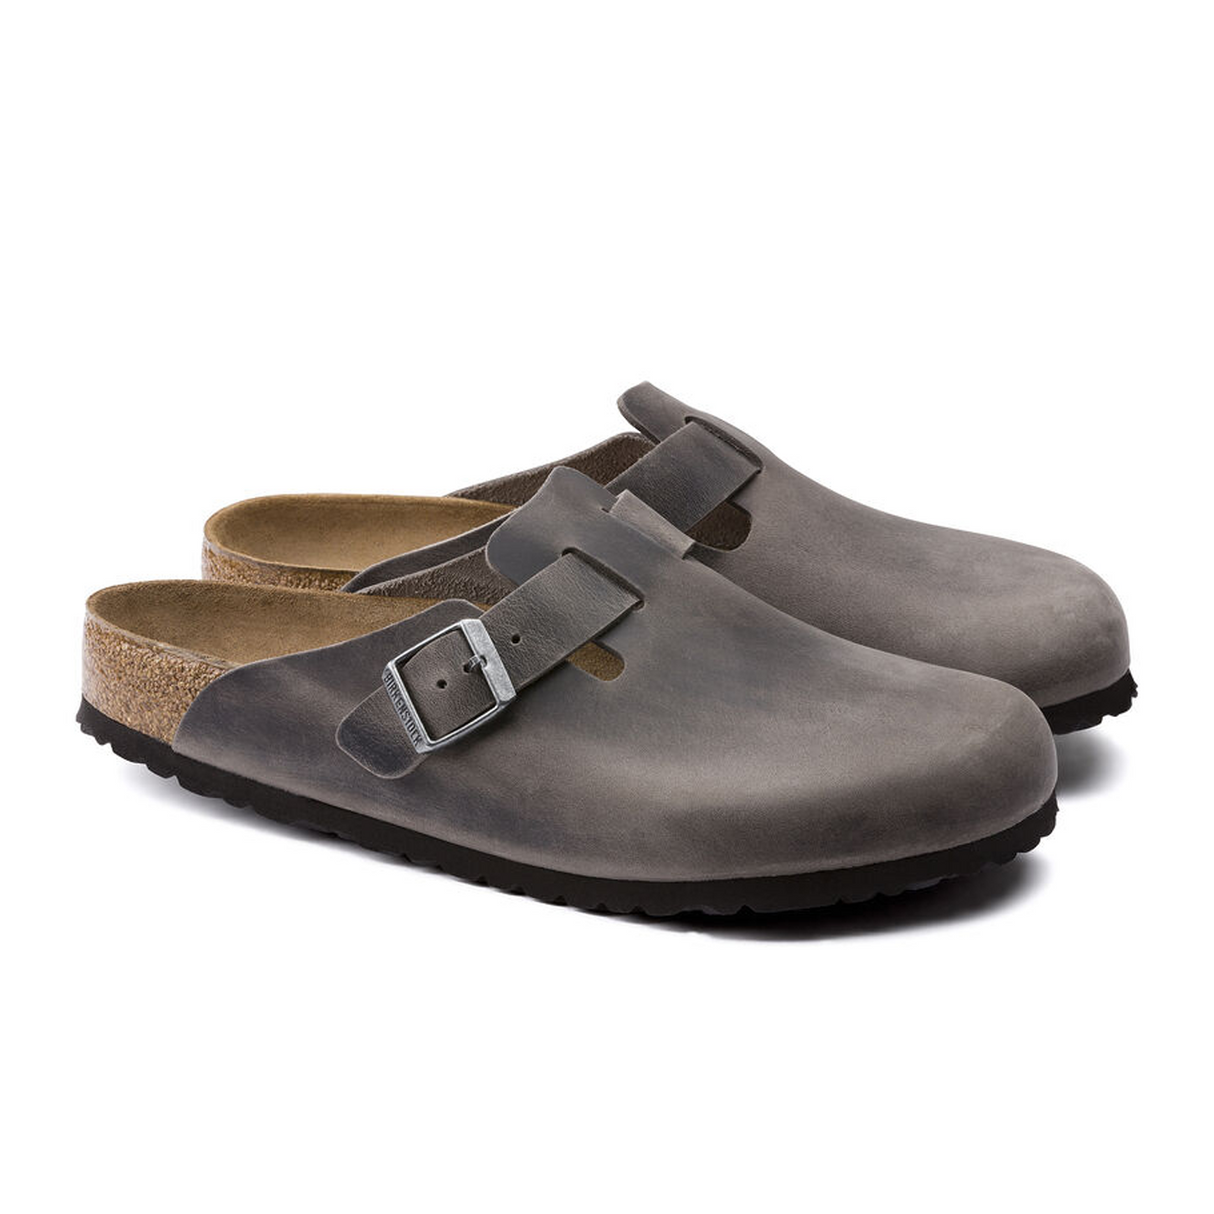 Birkenstock Boston Soft Footbed Narrow Clog (Women) - Iron Oiled Leather Dress-Casual - Clogs & Mules - The Heel Shoe Fitters